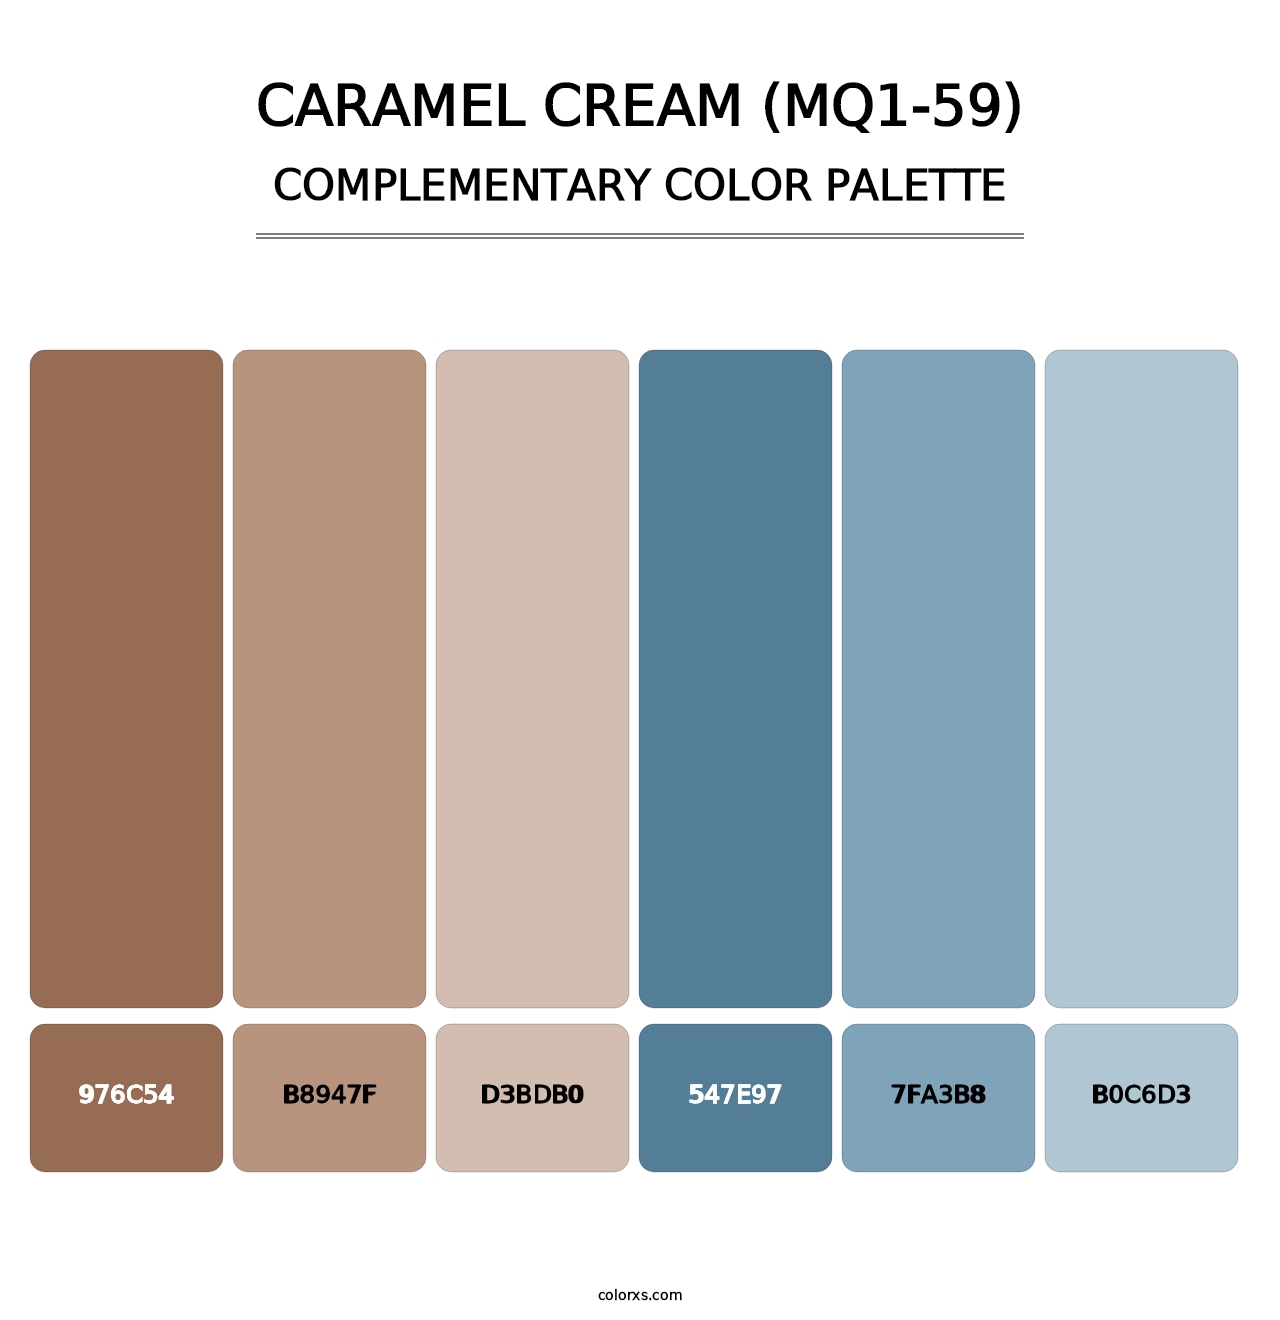 Caramel Cream (MQ1-59) - Complementary Color Palette